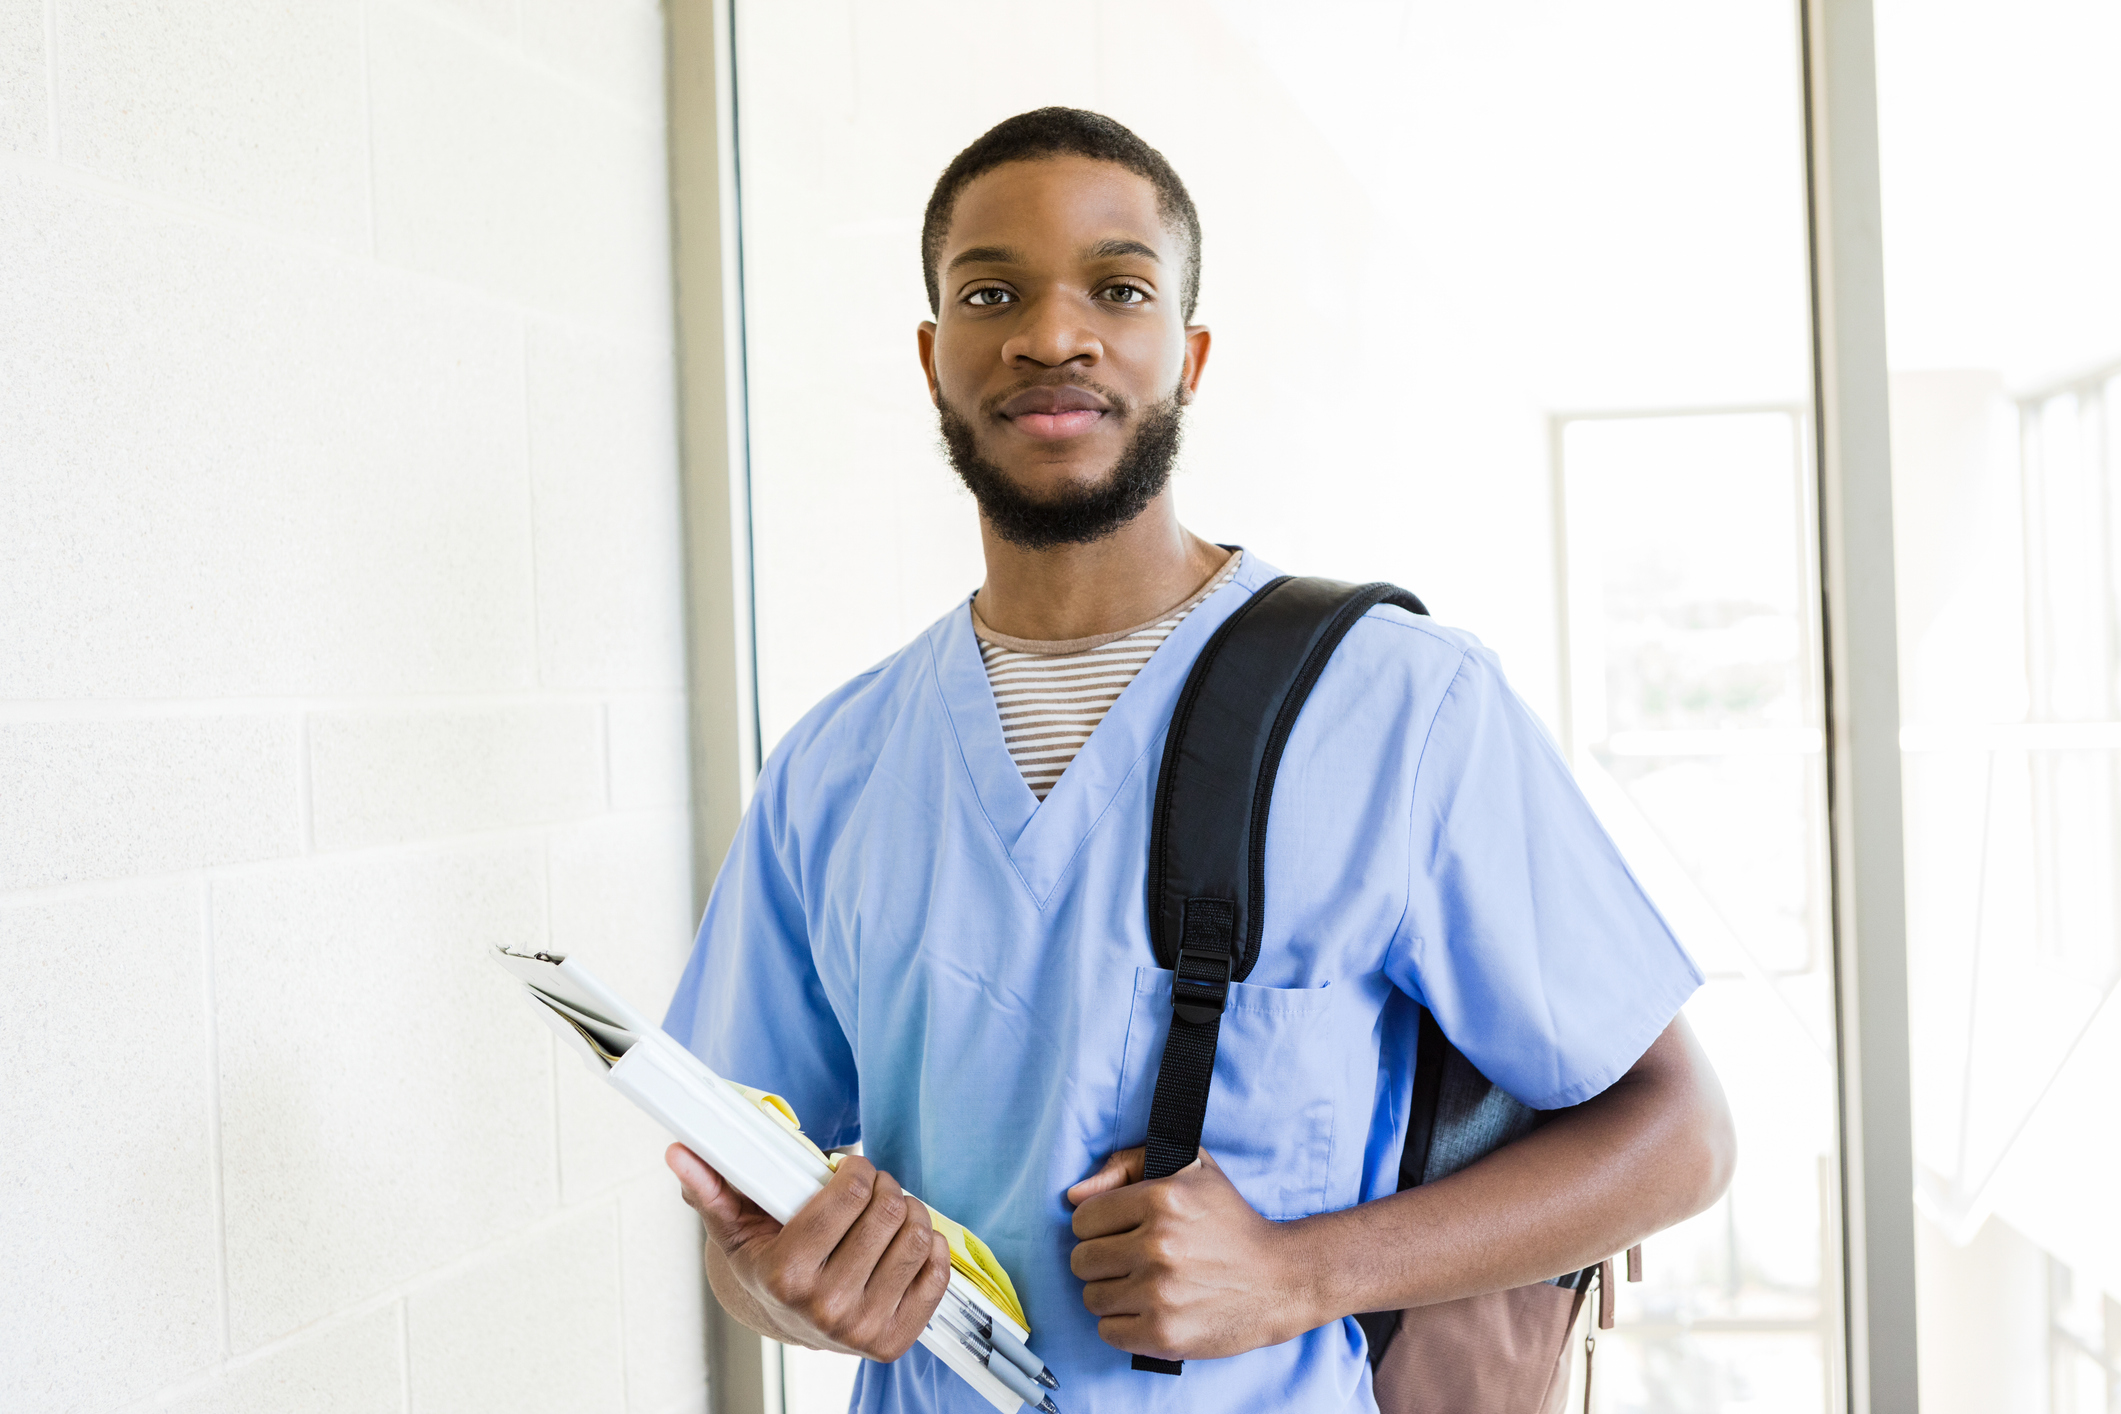 student in scrubs with school supplies